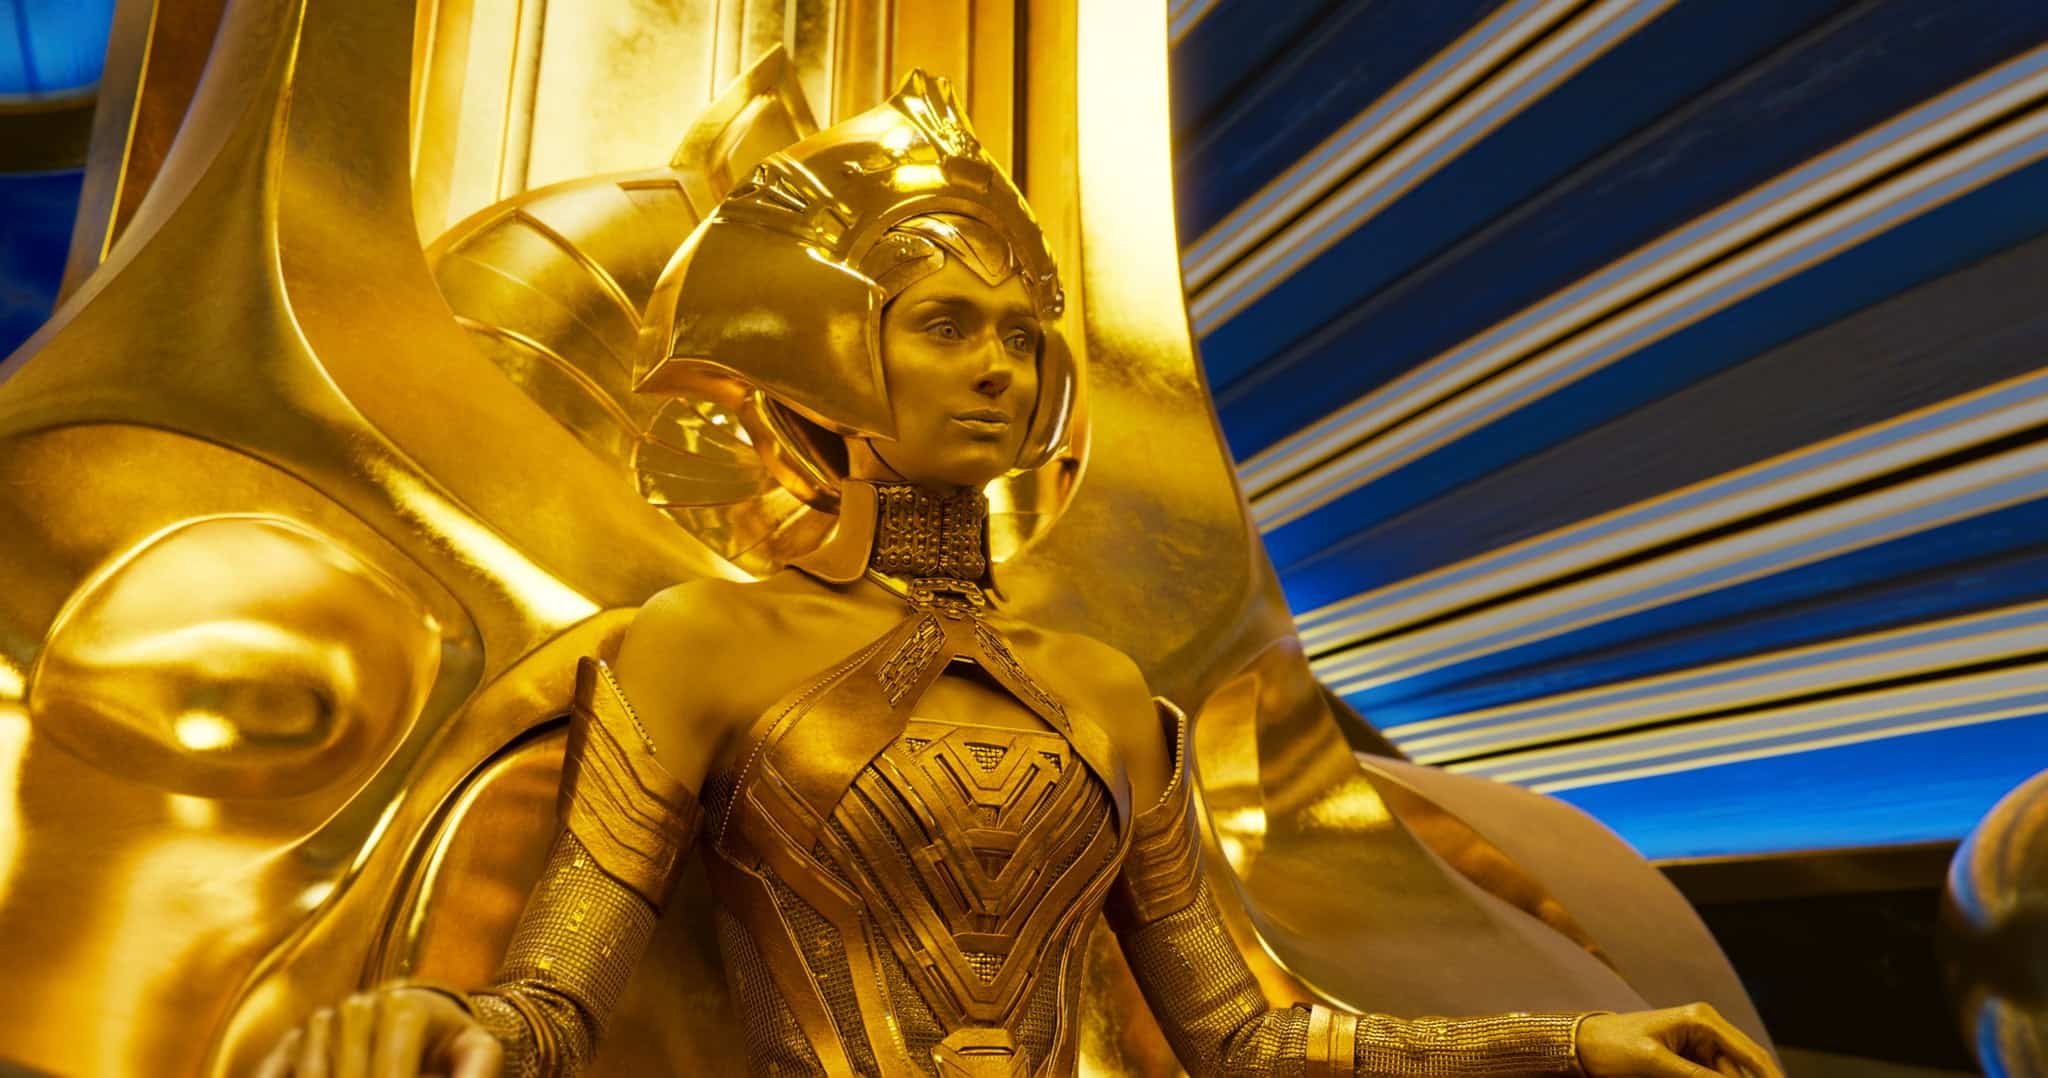 Ayesha, a Sovereign, references to Adam in Guardians of The Galaxy volume 2 post credit scene